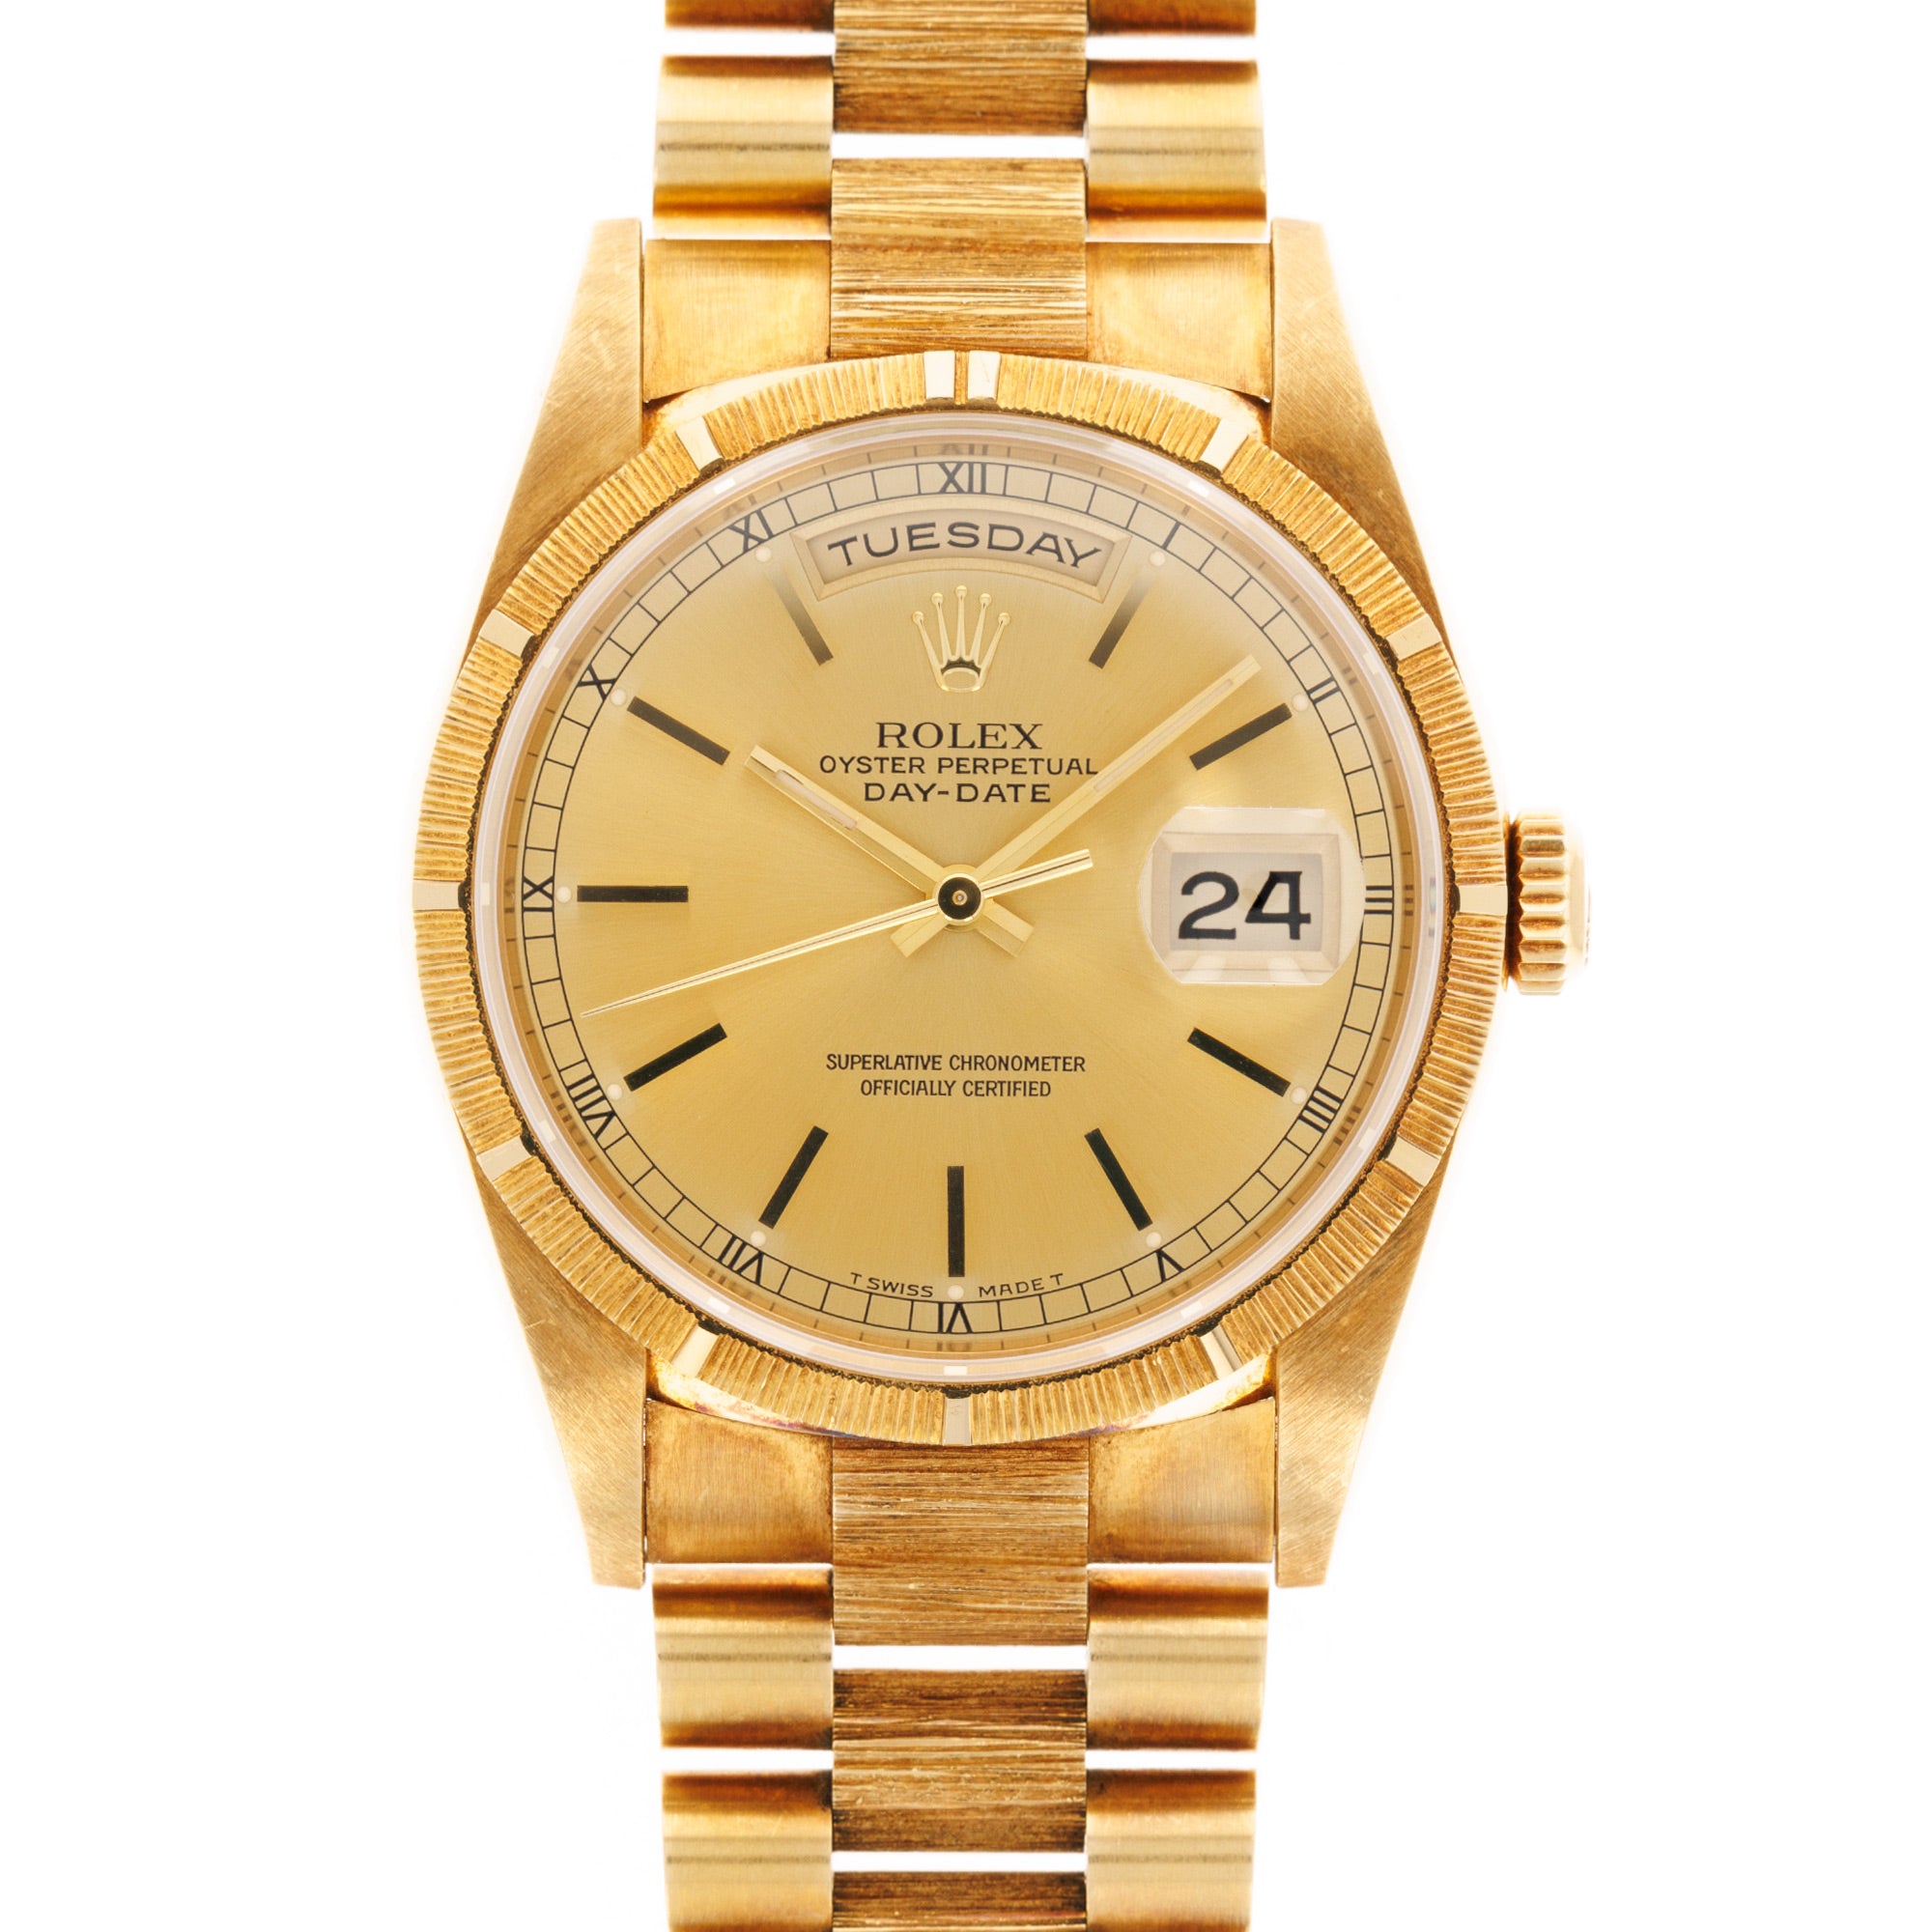 Rolex - Rolex Yellow Gold Day Date Ref. 18248 with Factory Bark Finish - The Keystone Watches